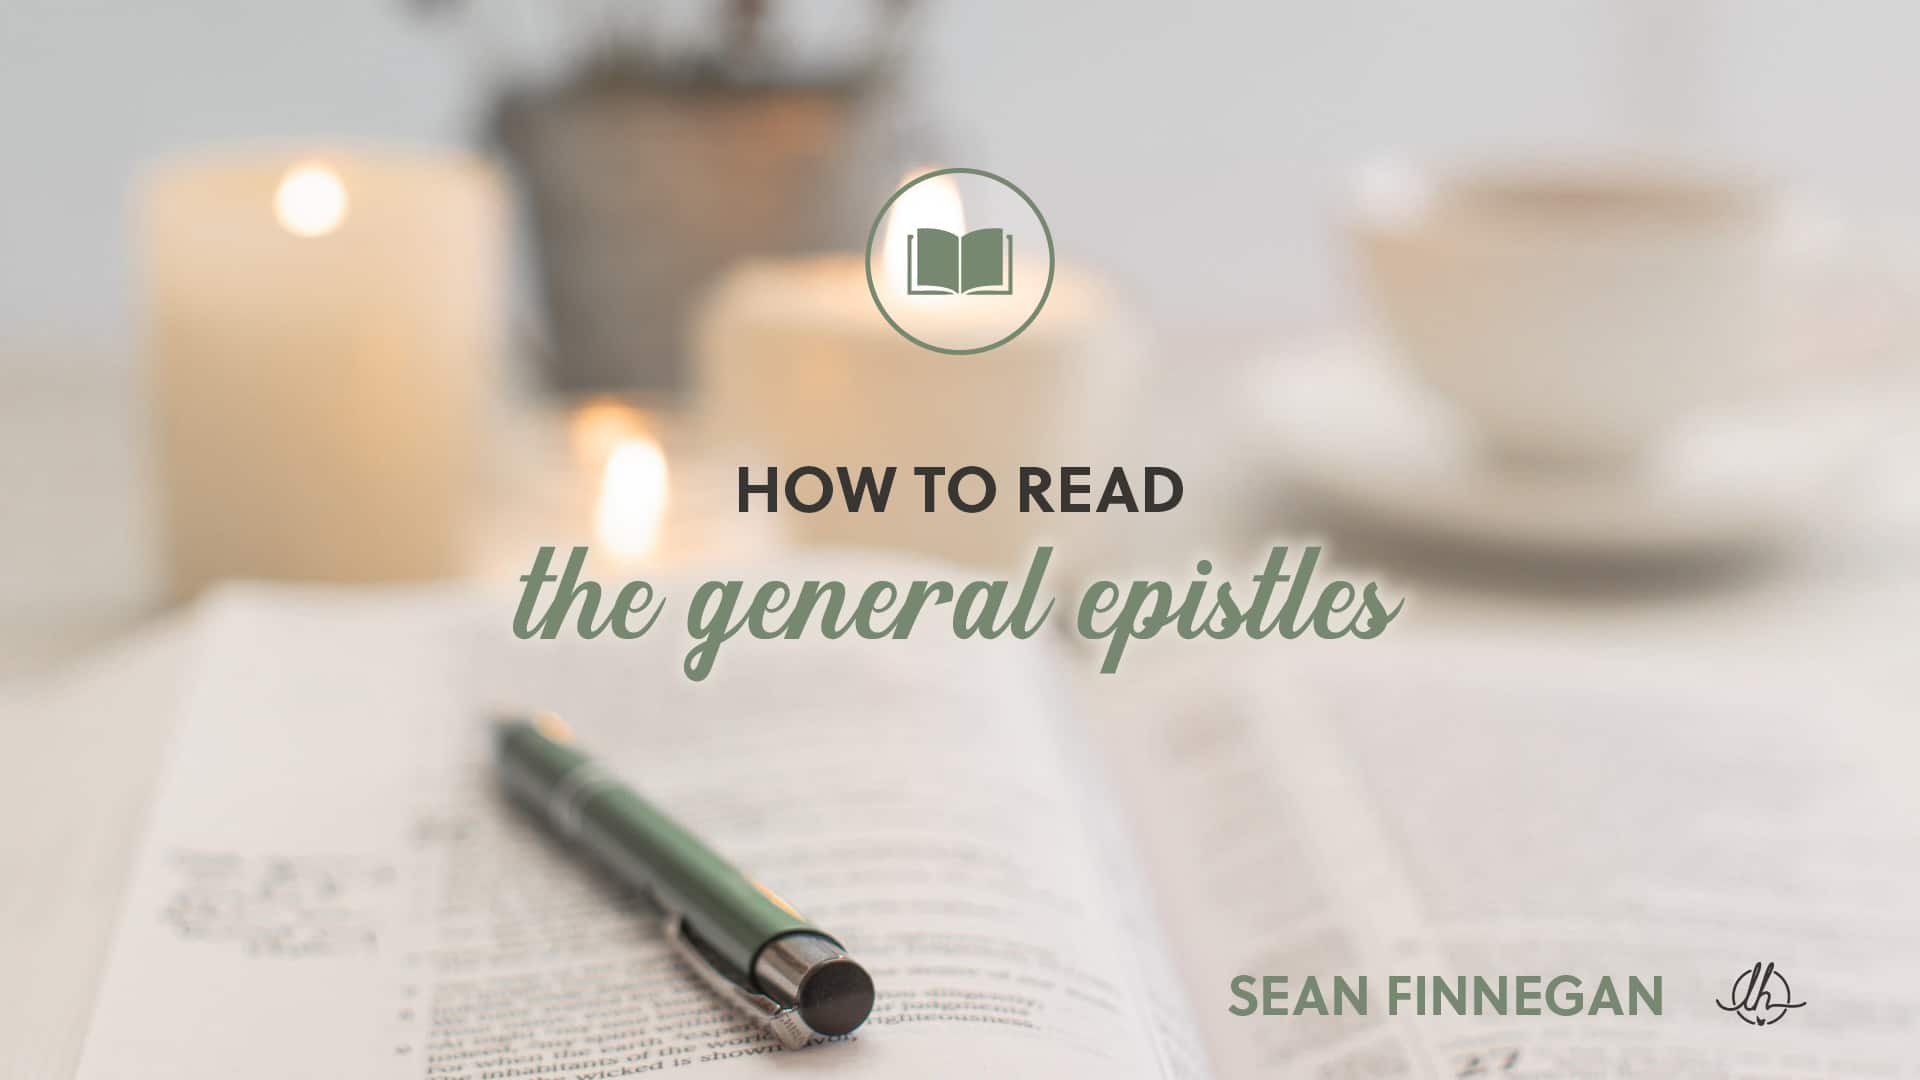 15: How to Read the General Epistles